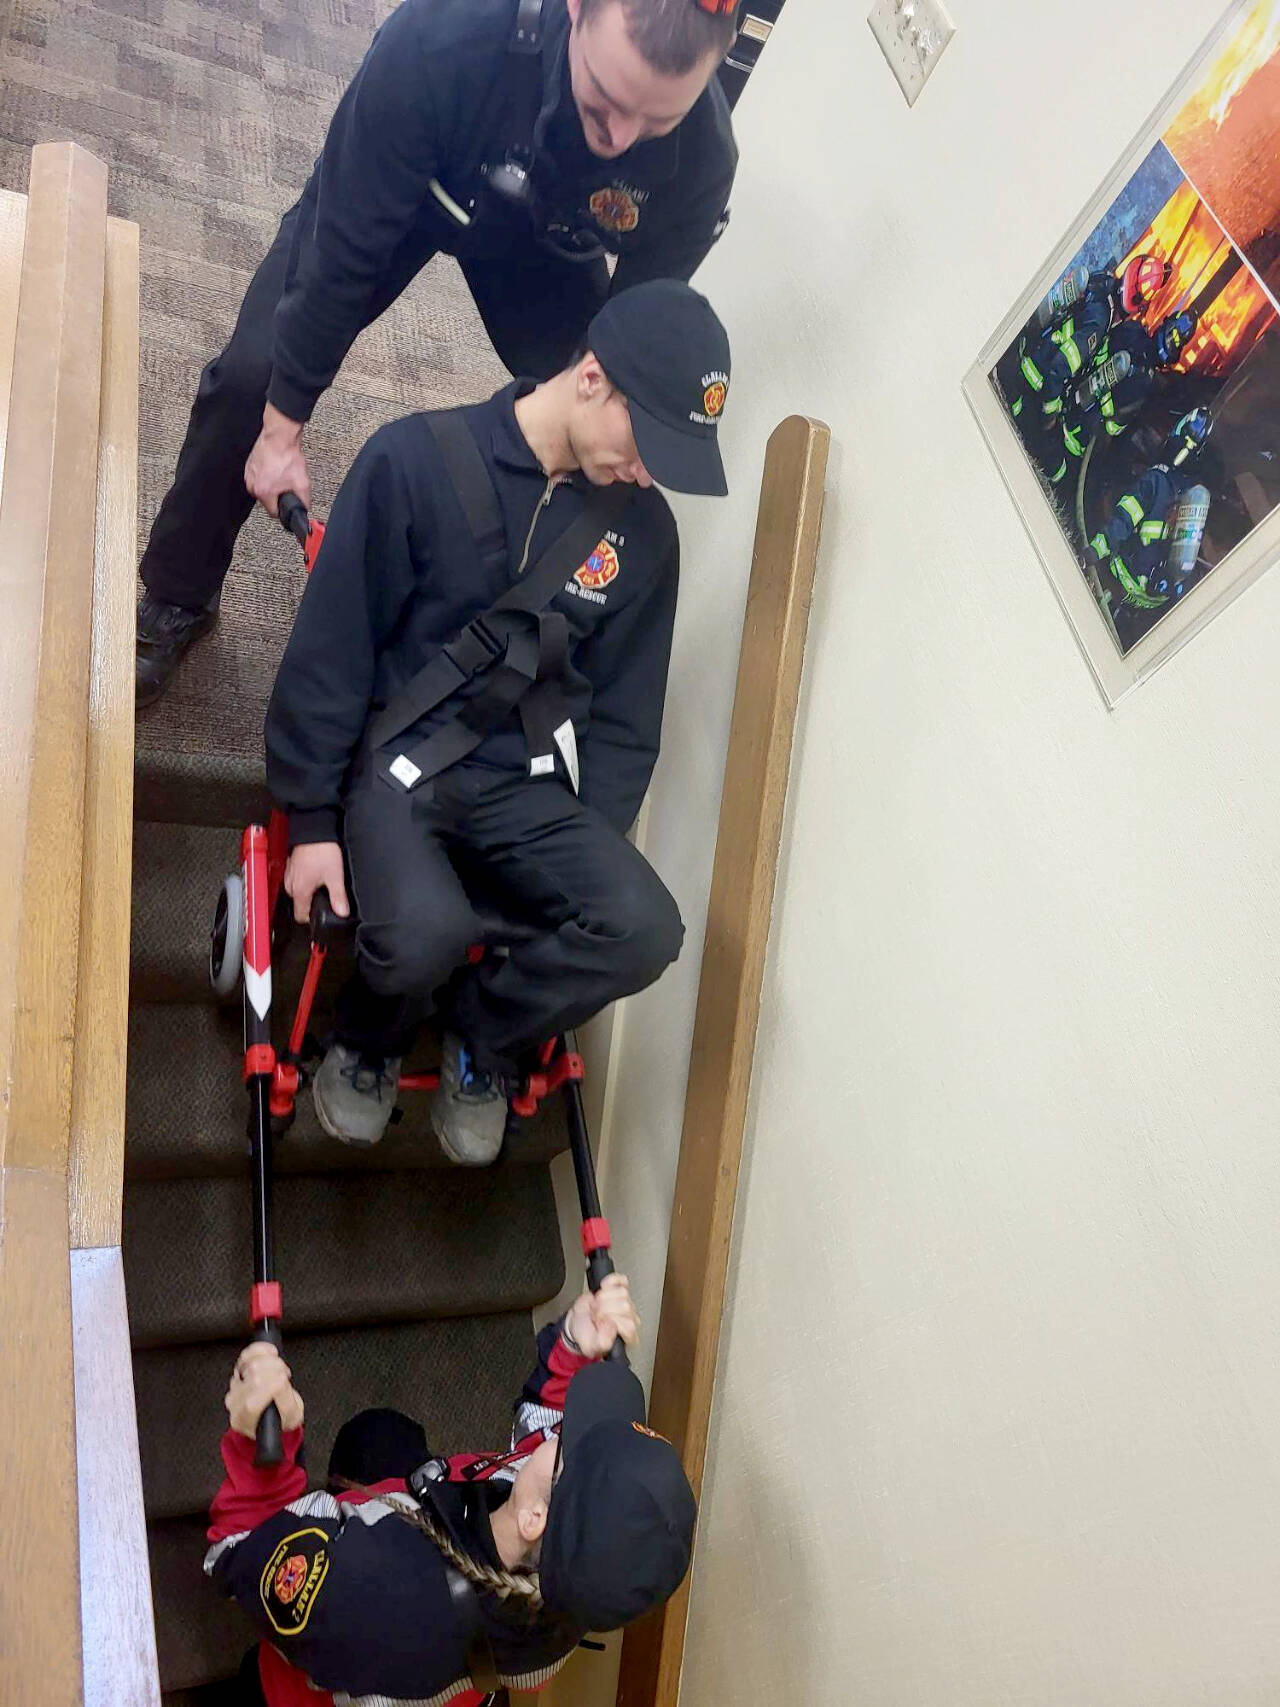 Captain/EMT Tyler Gear, at top, and Firefighter/Paramedic Margie Brueckner, bottom, train on Clallam 2’s new stair chair by lowering Recruit Theo Saxe down a flight of stairs.